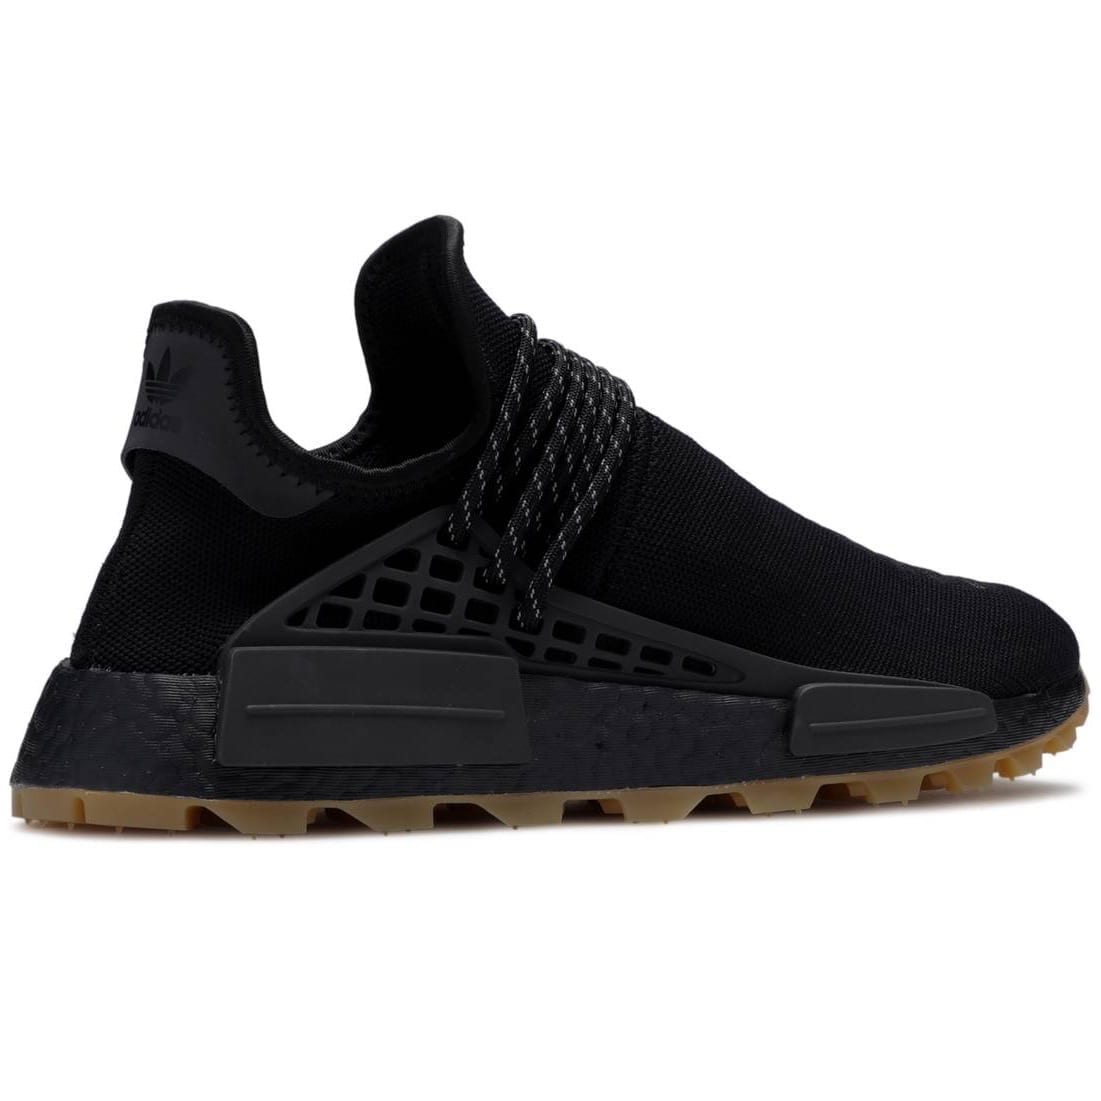 Adidas NMD x Pharrell Williams Human Race Trail Now Is Her Time Black